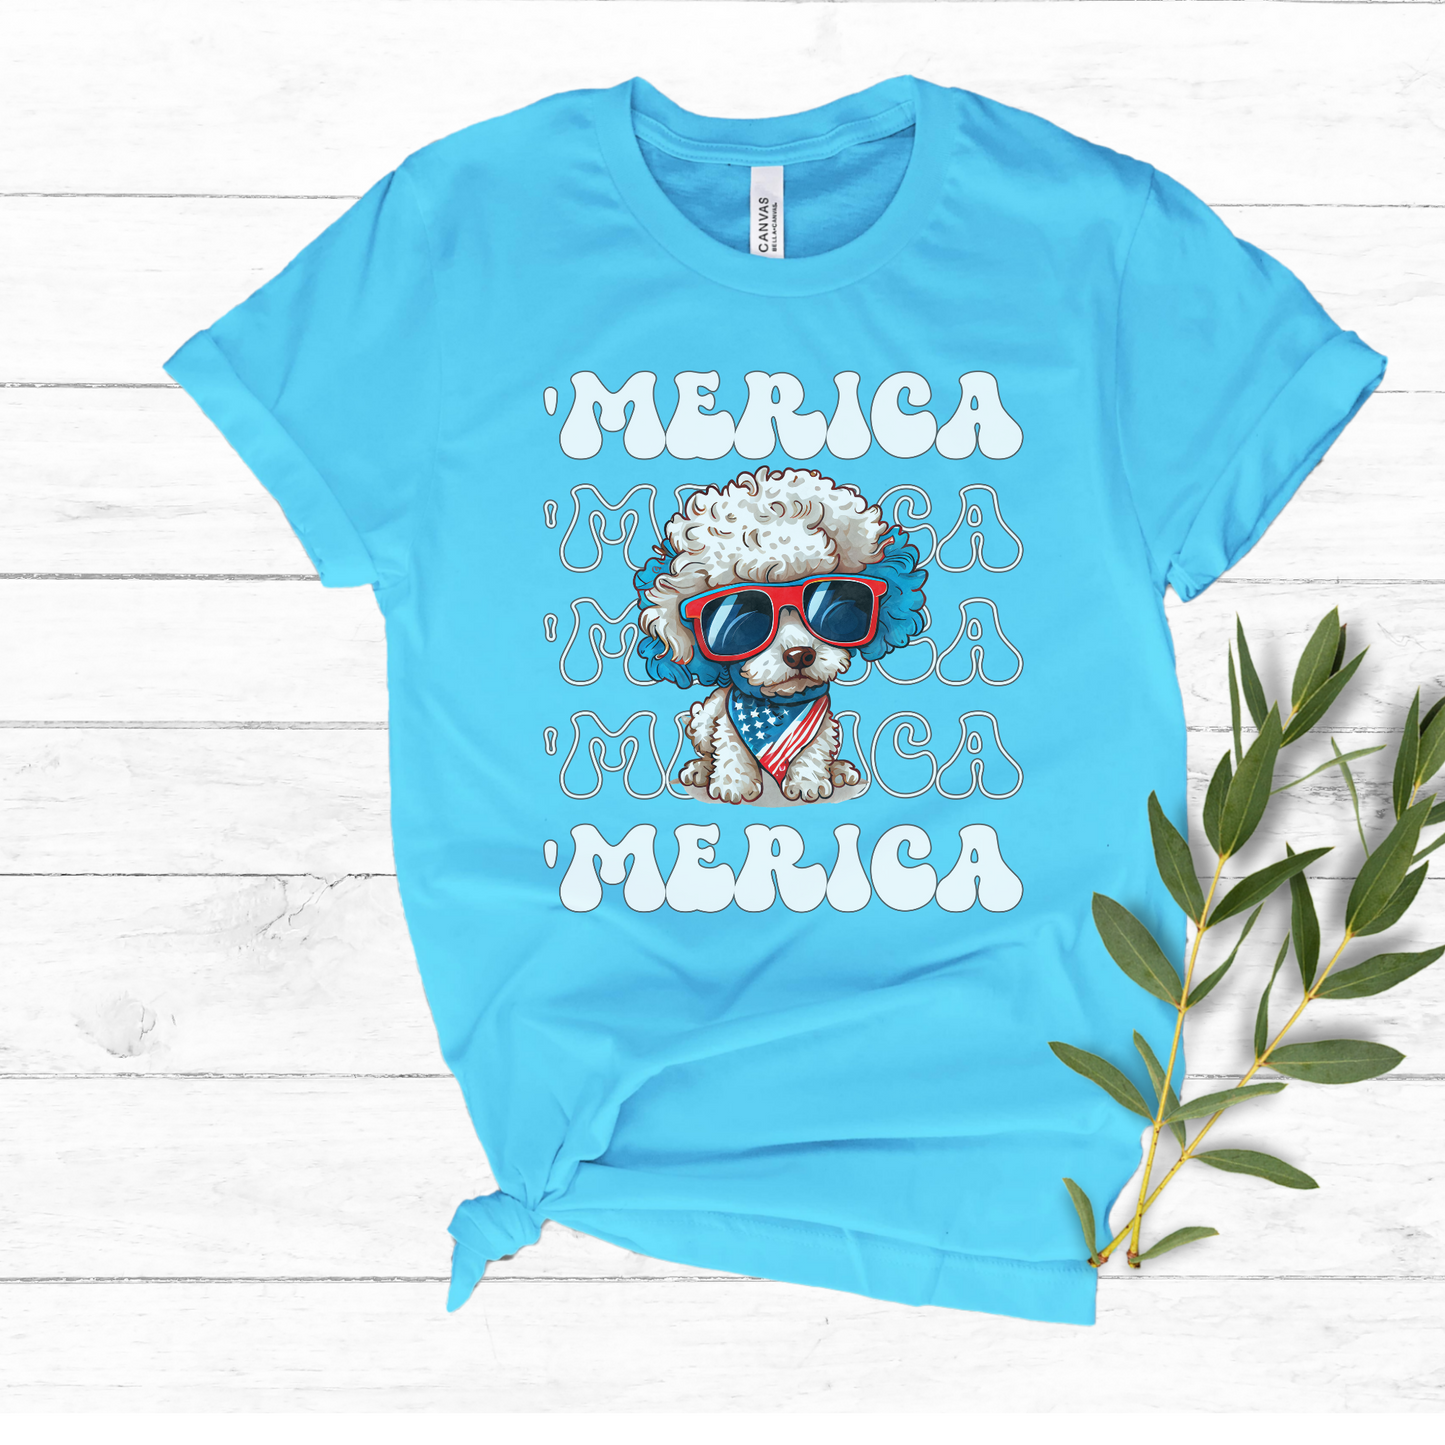 Poodle 'Merica Patriotic T-Shirt, White Poodle 4th of July Top, Miniature Poodle Dog Fourth of July Shirt Red White Blue Cute Poodle Tee